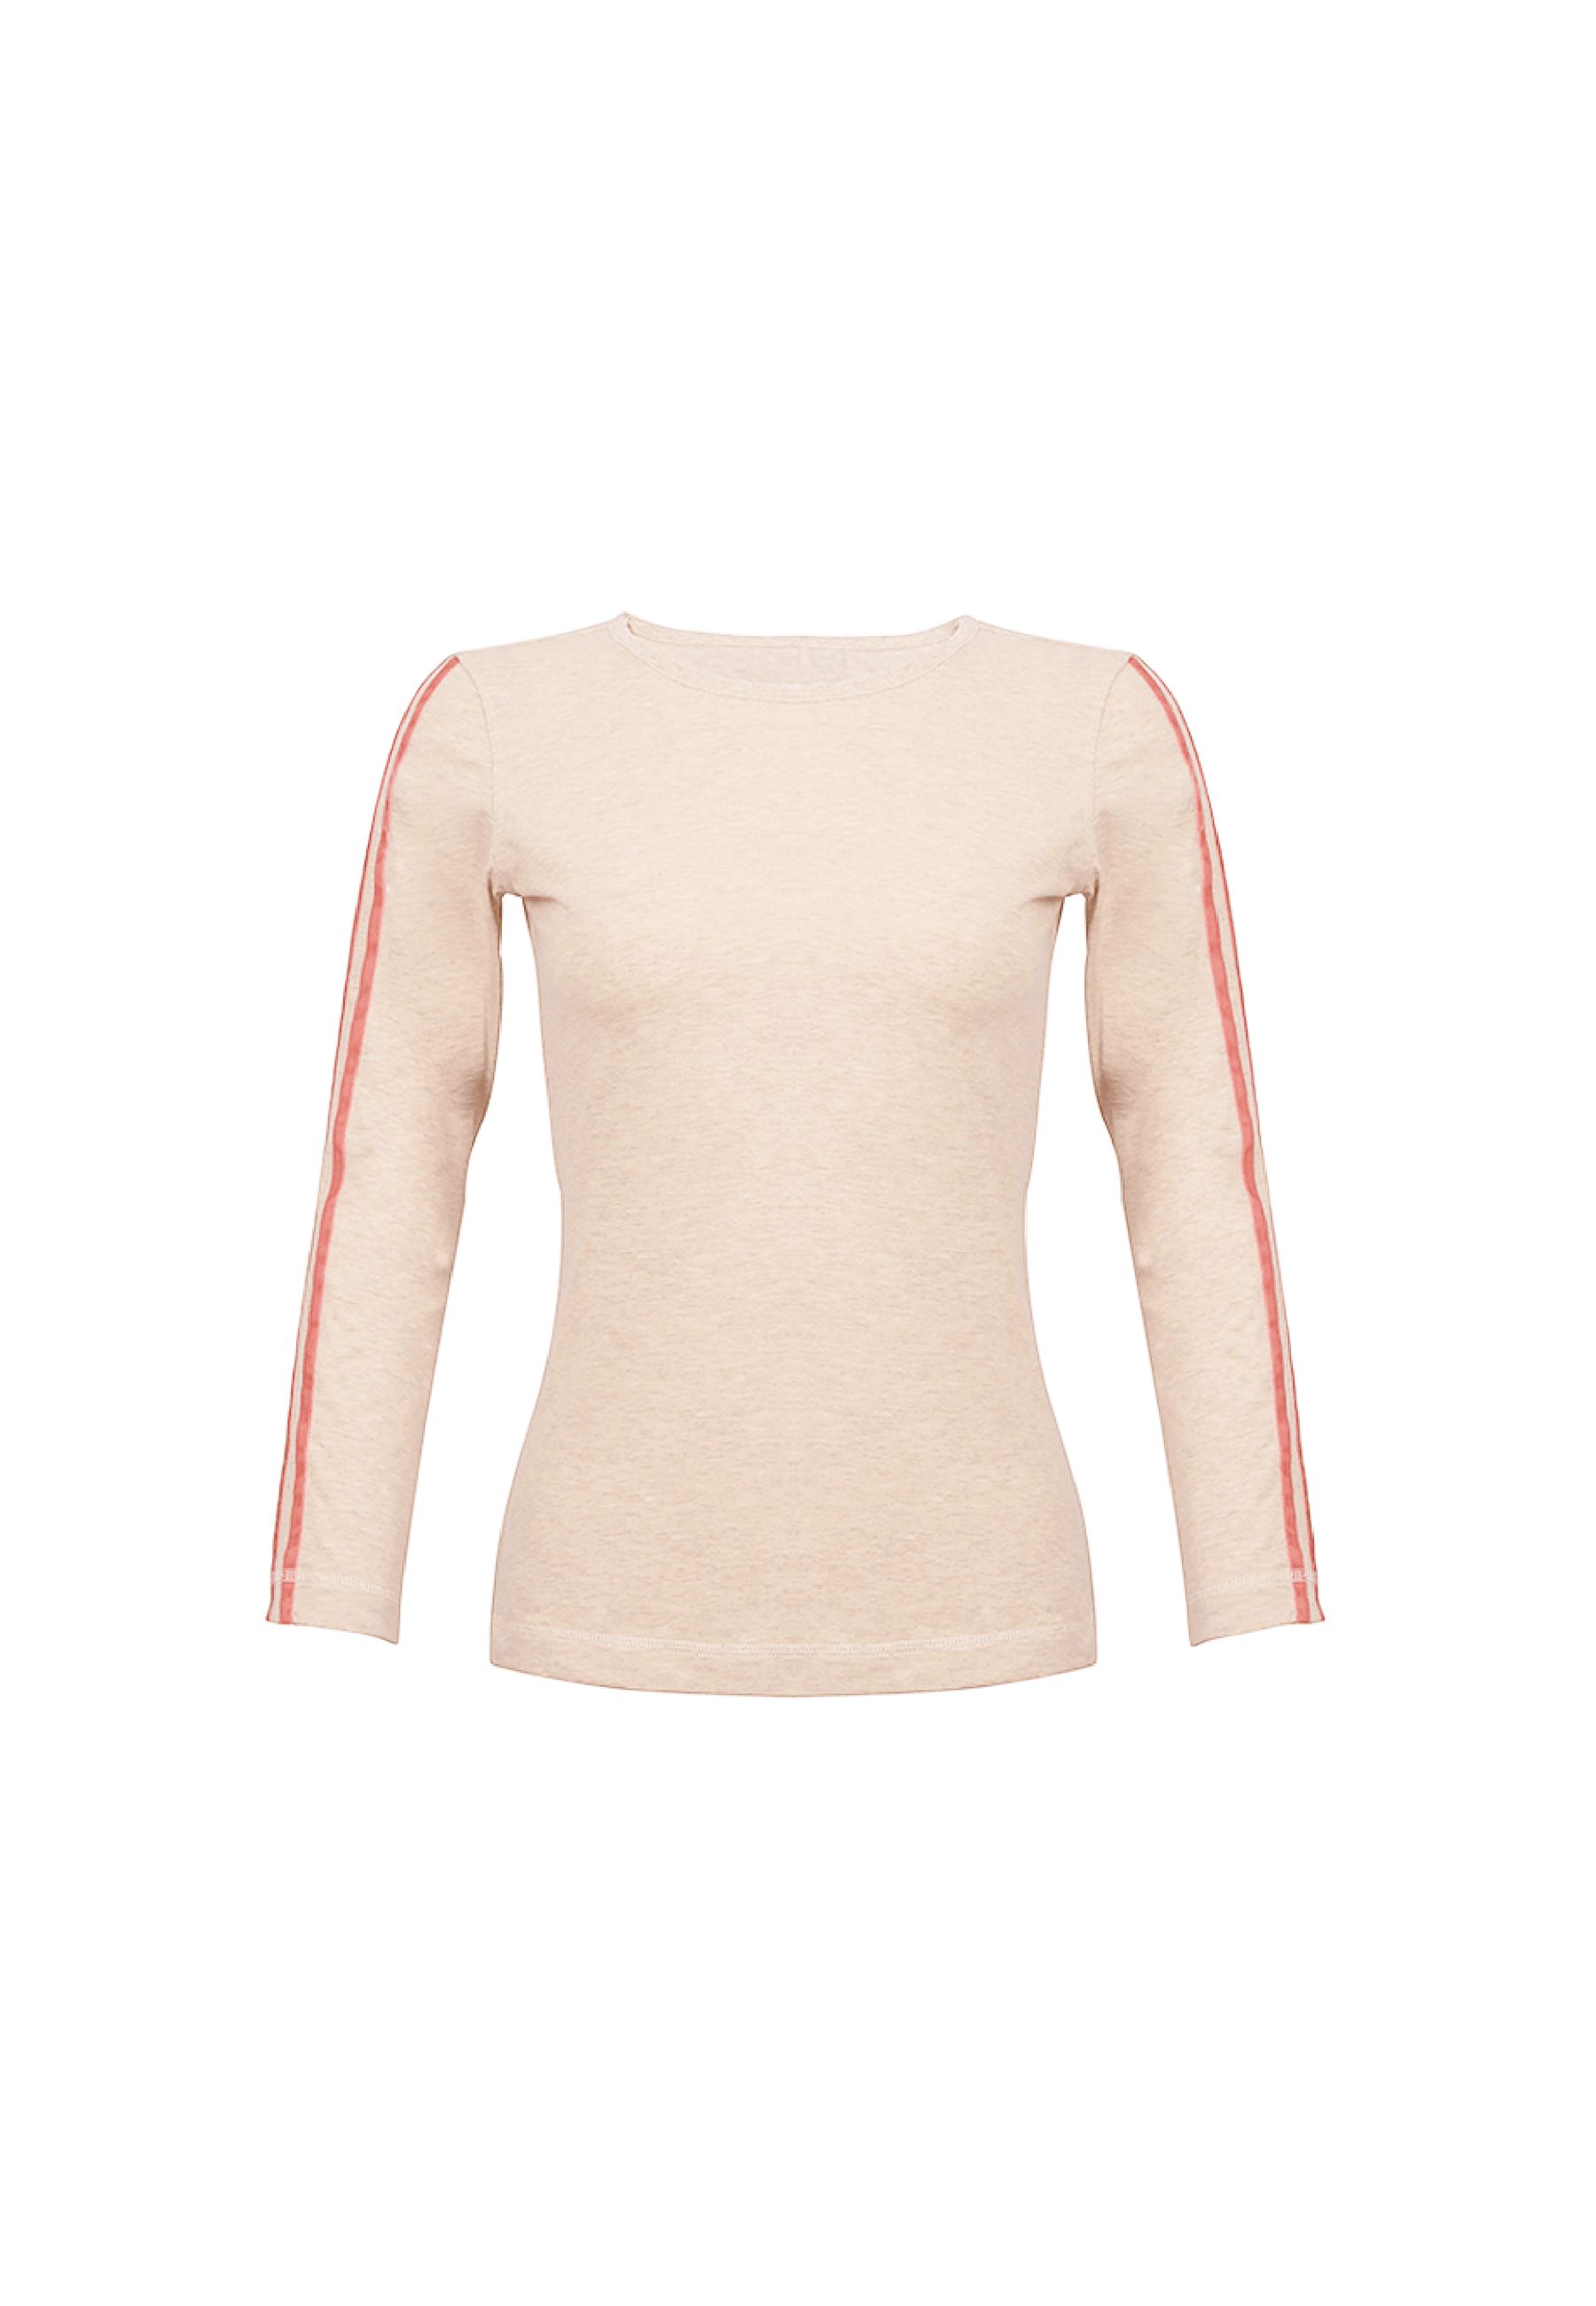 Women's Long Sleeve Cotton Mélange T-shirt - Yvette Cool WT1 - Ash Rose | Wolf and Badger (Global excl. US)